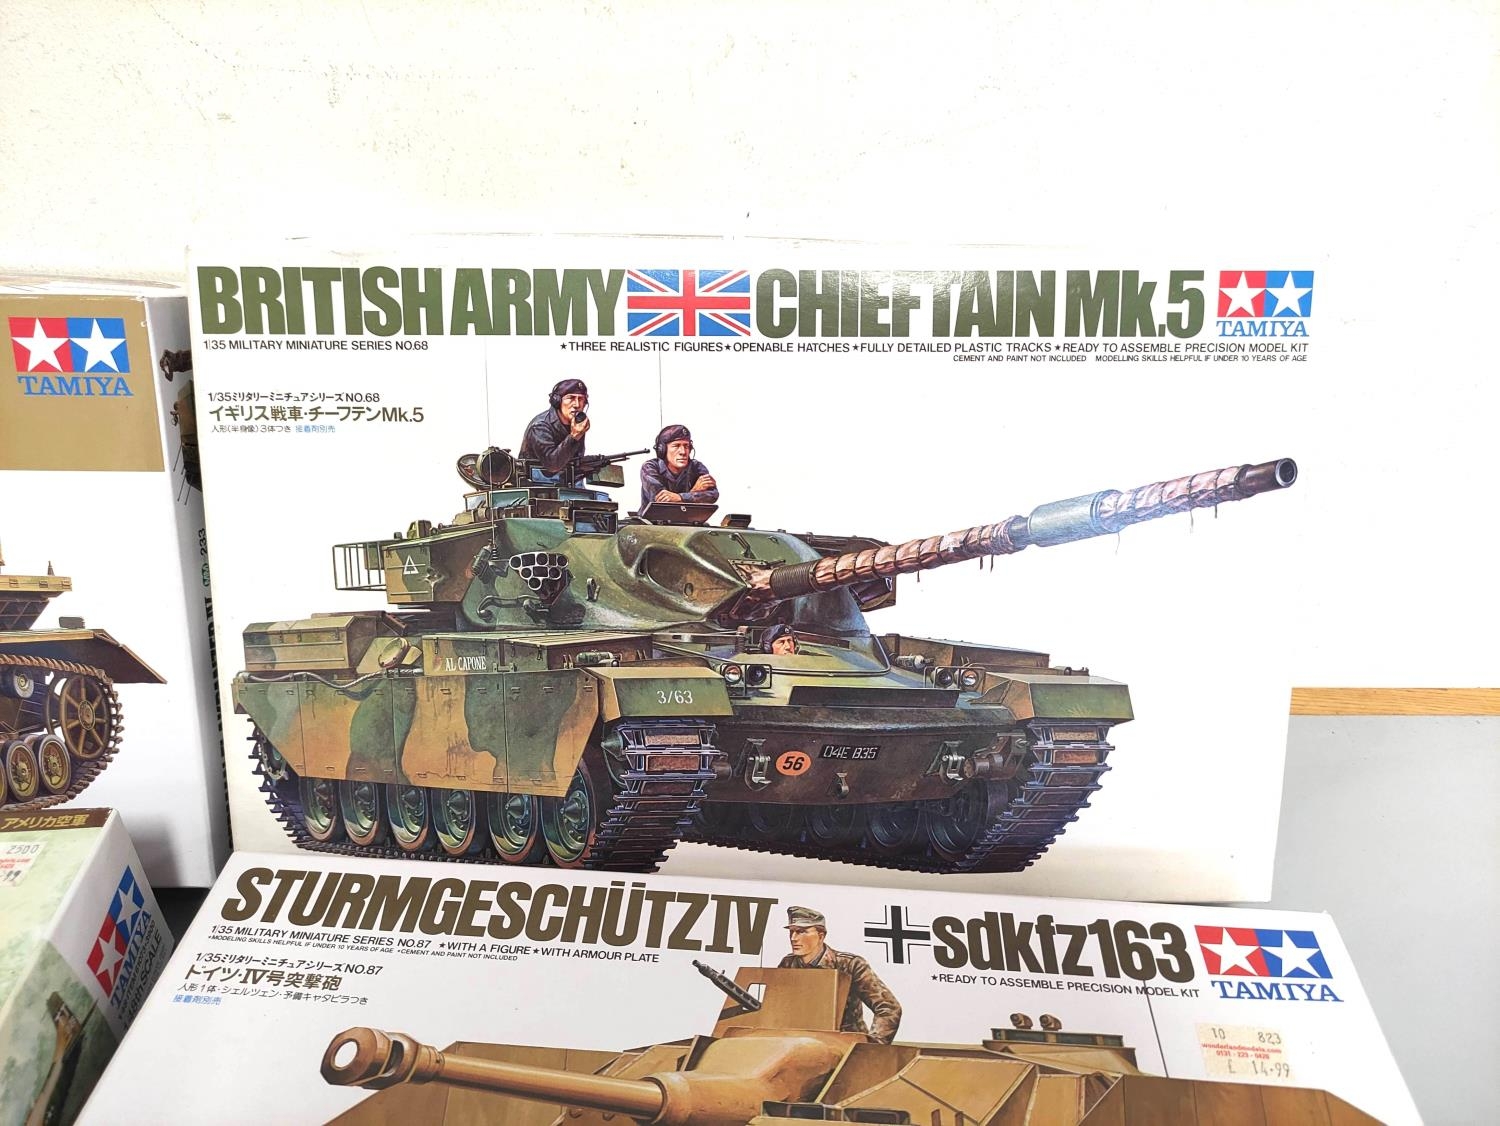 Tamiya. Group of 1:35 scale models to include British Army Chieftain Mk.5 No 68, SdKfz163 No 87, - Image 4 of 7